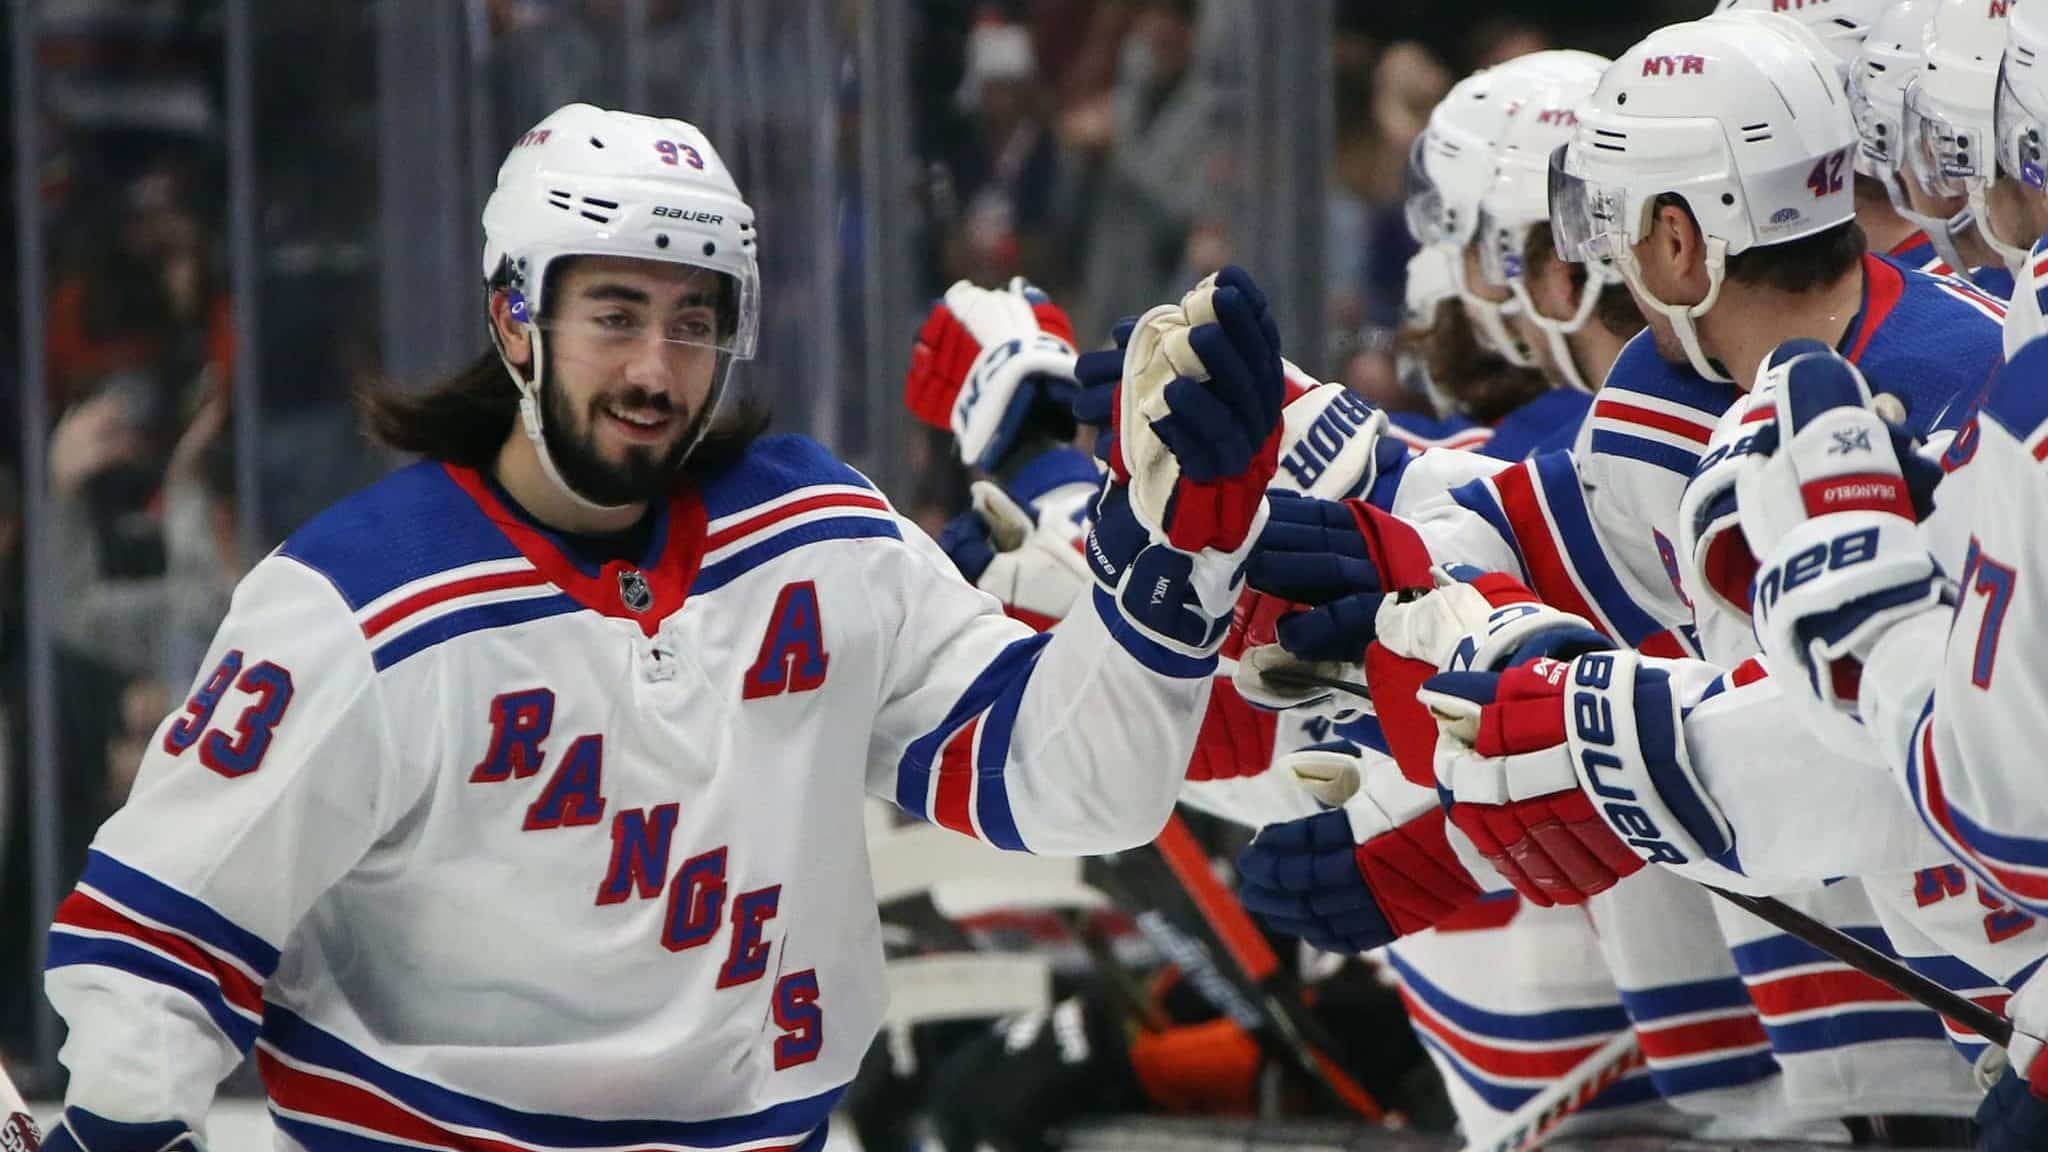 ANAHEIM, CALIFORNIA - DECEMBER 14: Mika Zibanejad #93 of the New York Rangers celebrates his goal at 10 seconds of the first period against John Gibson #36 of the Anaheim Ducks at the Honda Center on December 14, 2019 in Anaheim, California.